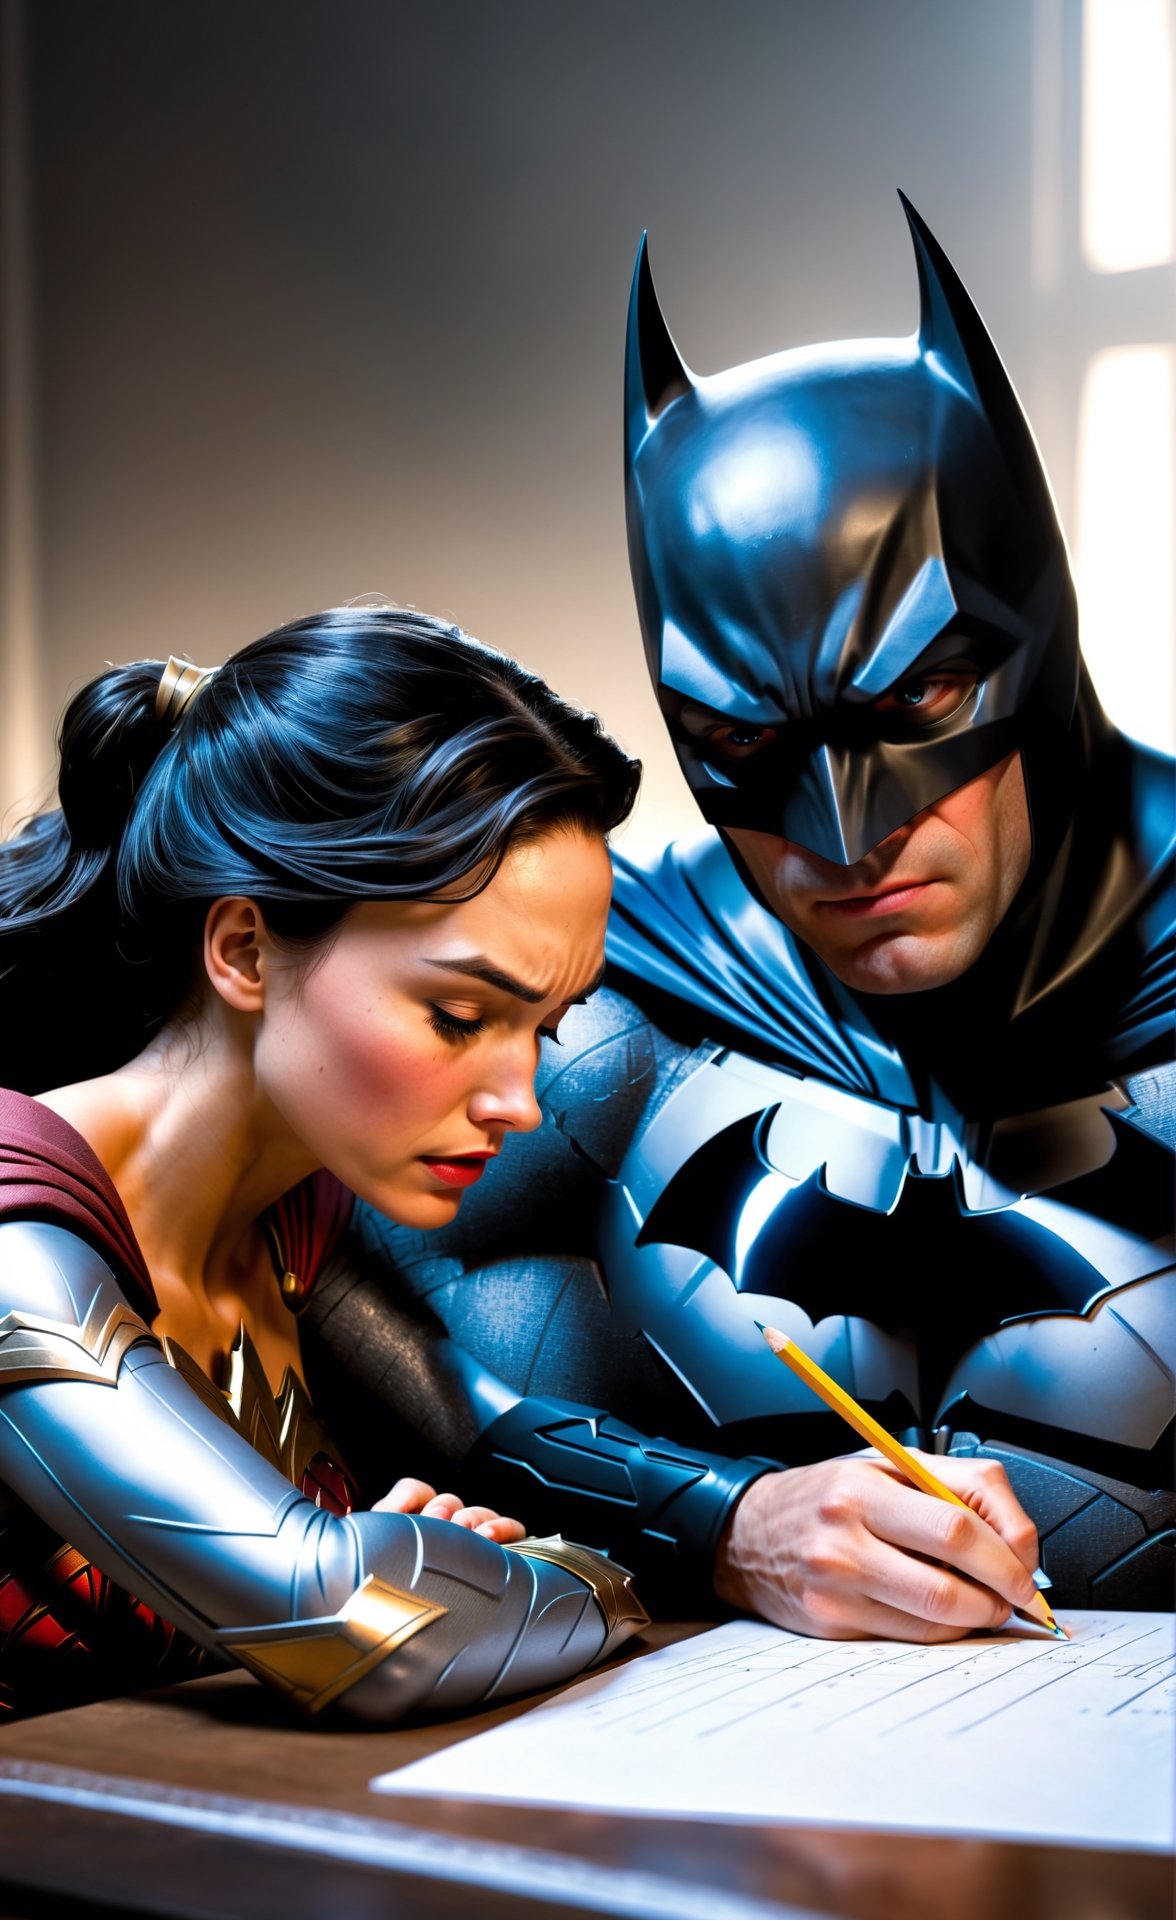 Create a 8k, photo realistic image of Batman trying to do math but math is hard and he is crying at the table over the pencil and paper. Have Wonder Woman behind him with her hand on his shoulder as she try's to comfort her friend.